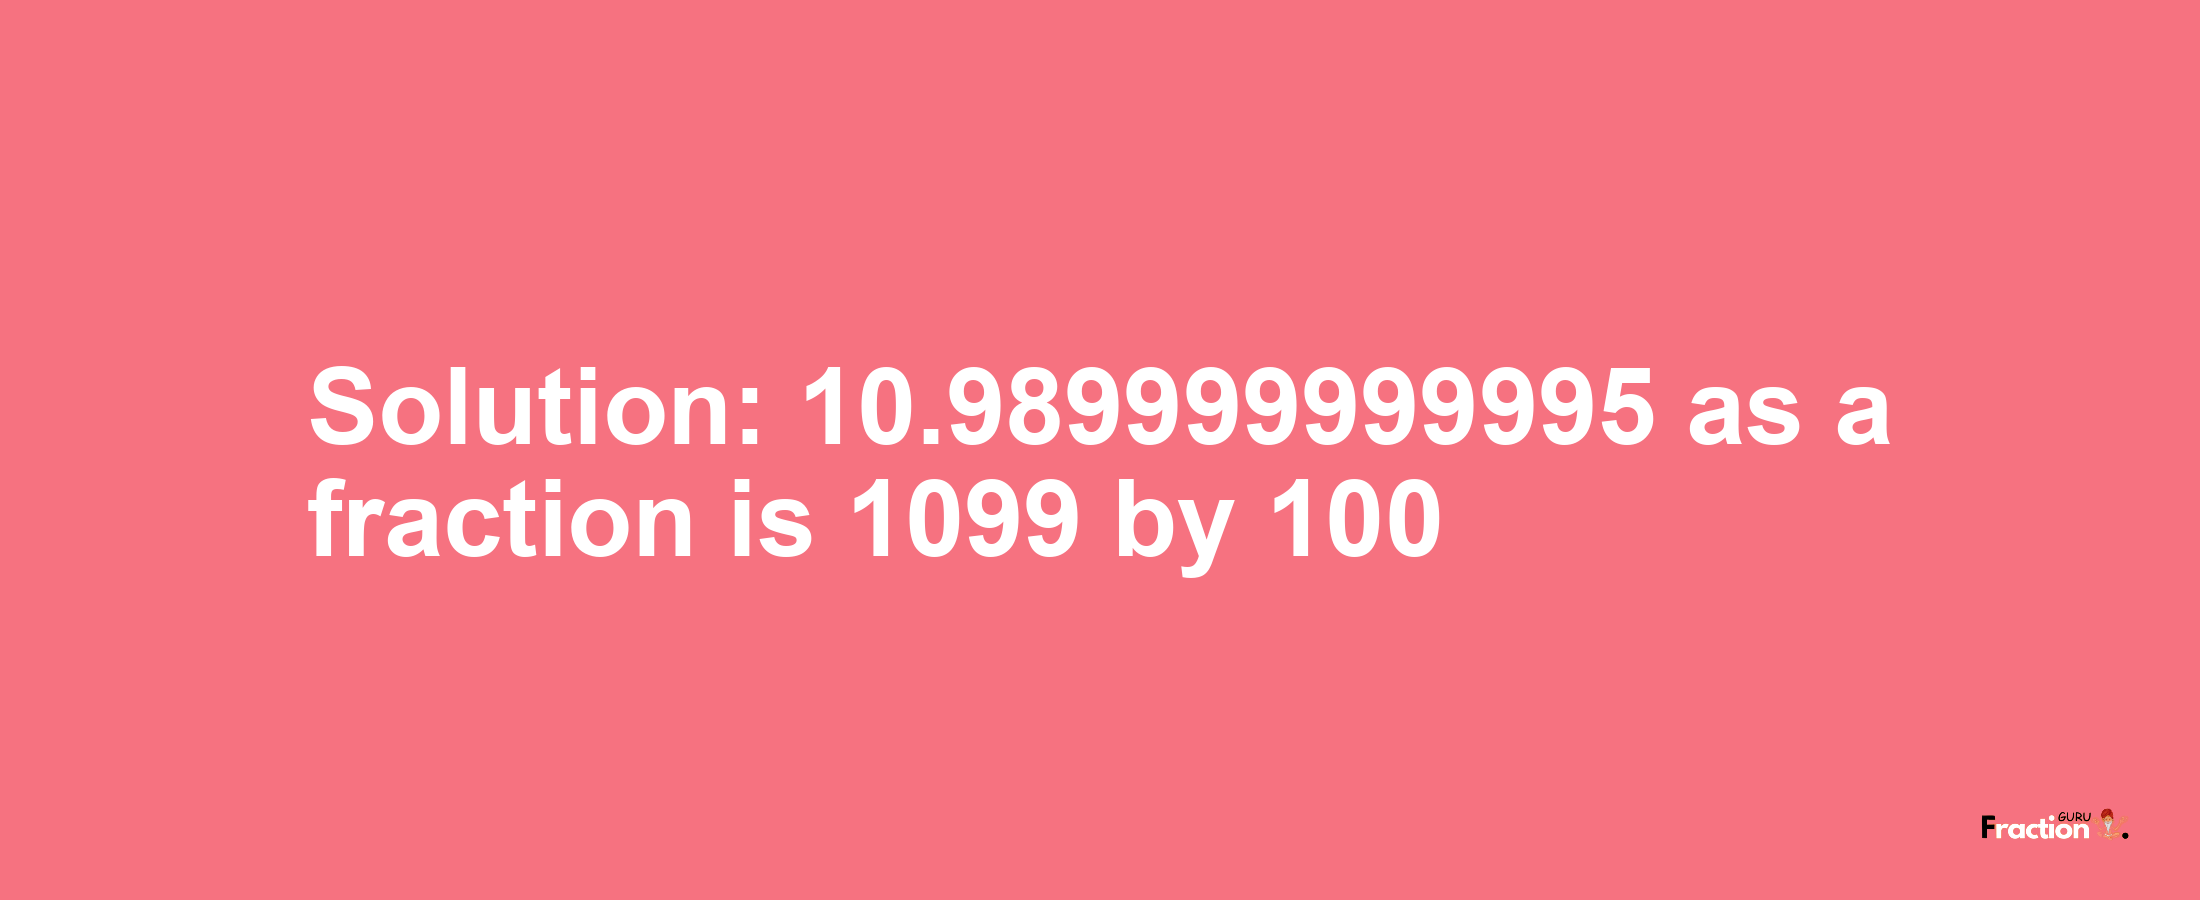 Solution:10.989999999995 as a fraction is 1099/100